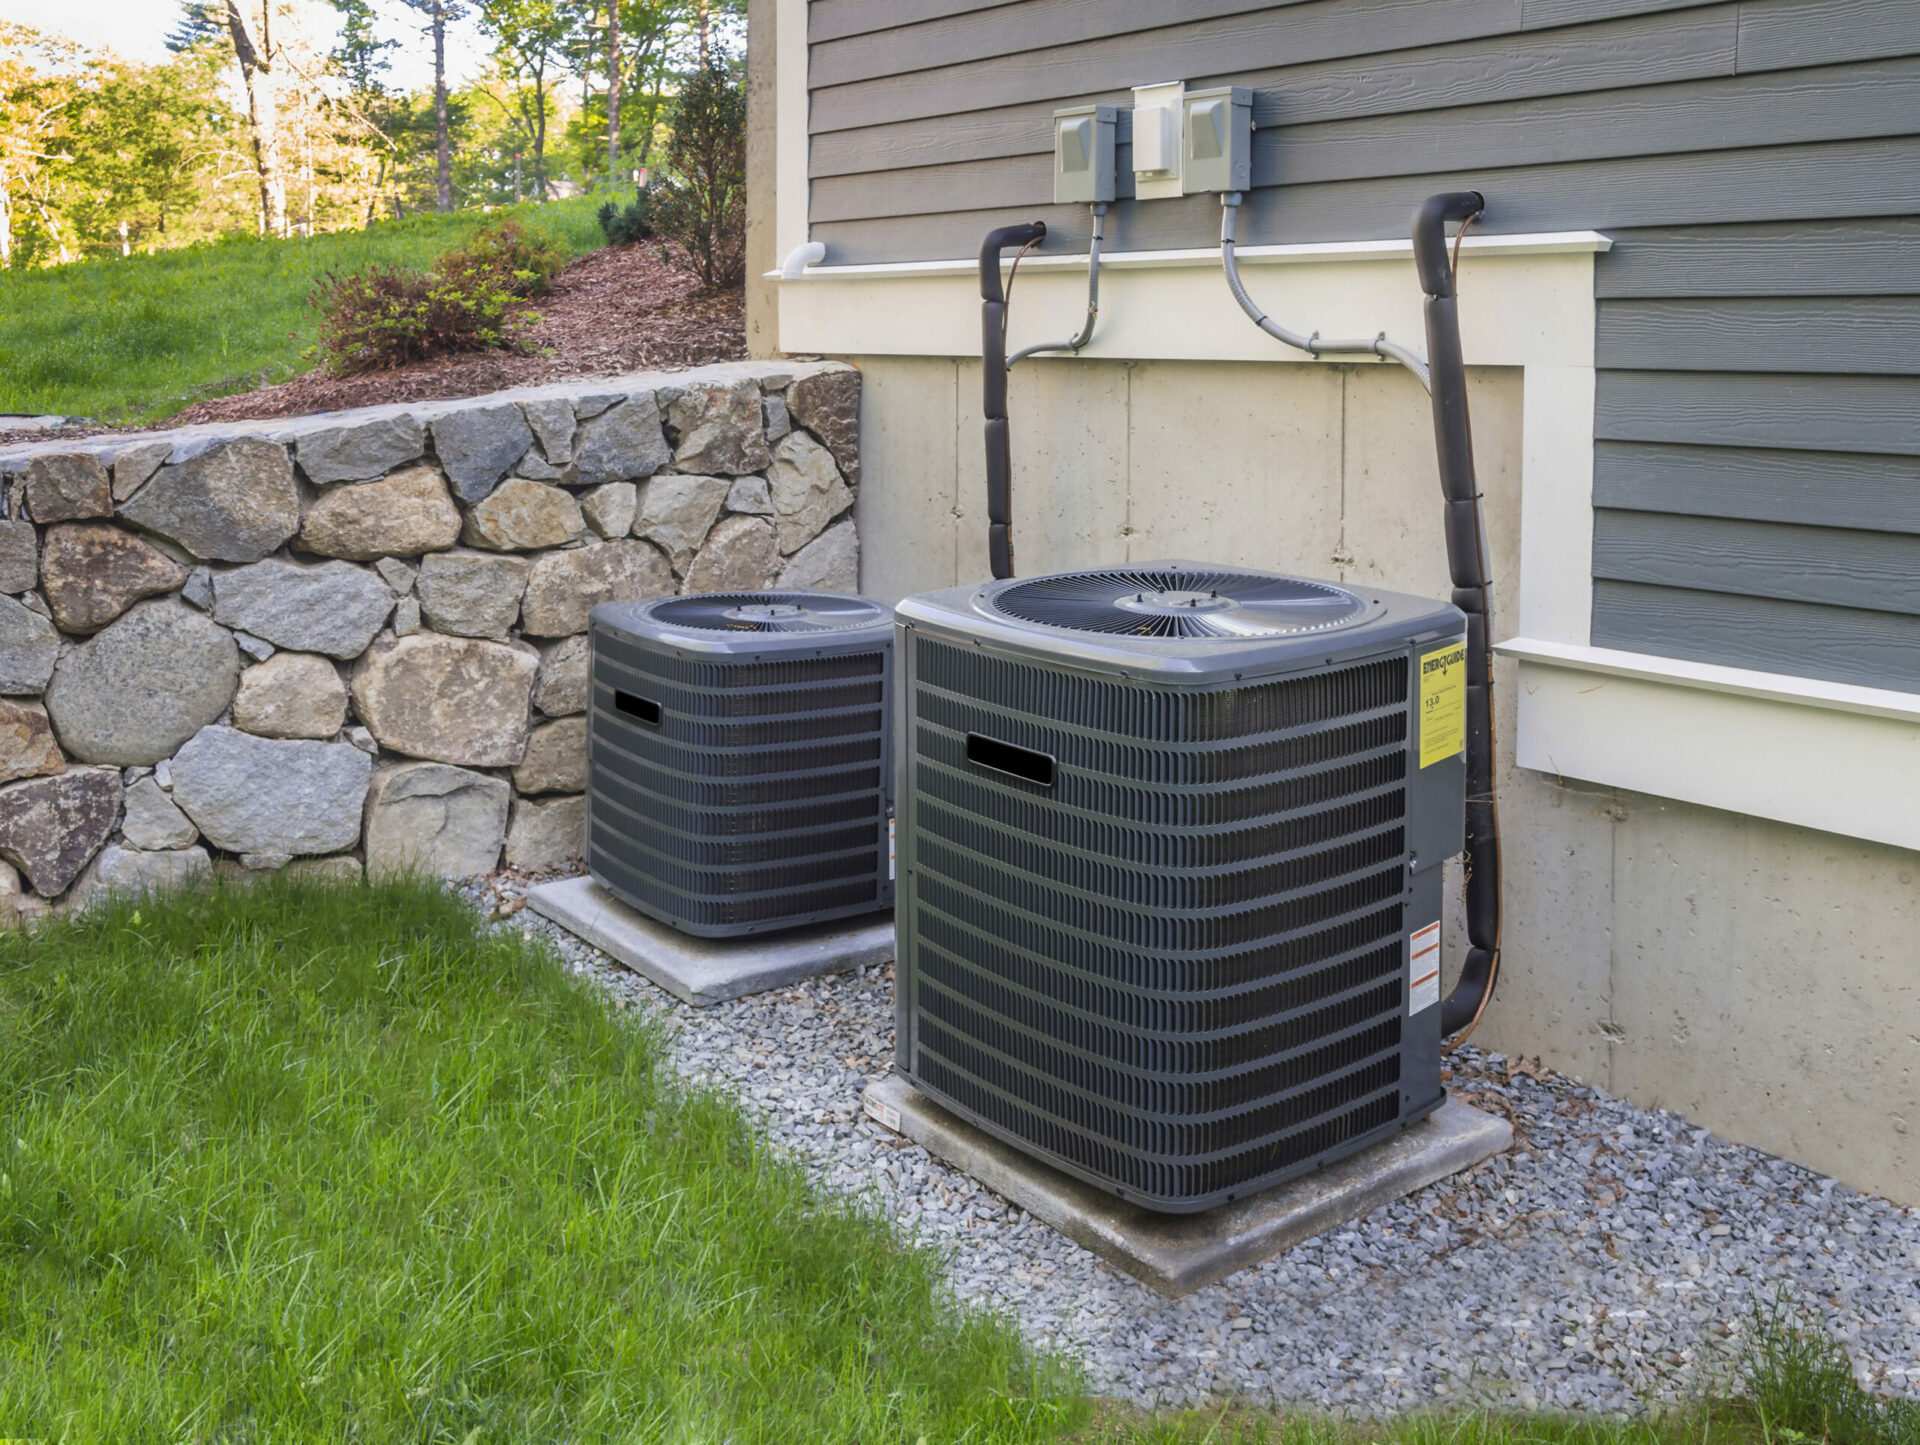 California may require homeowners to replace broken A/C units with heat pumps starting in 2026